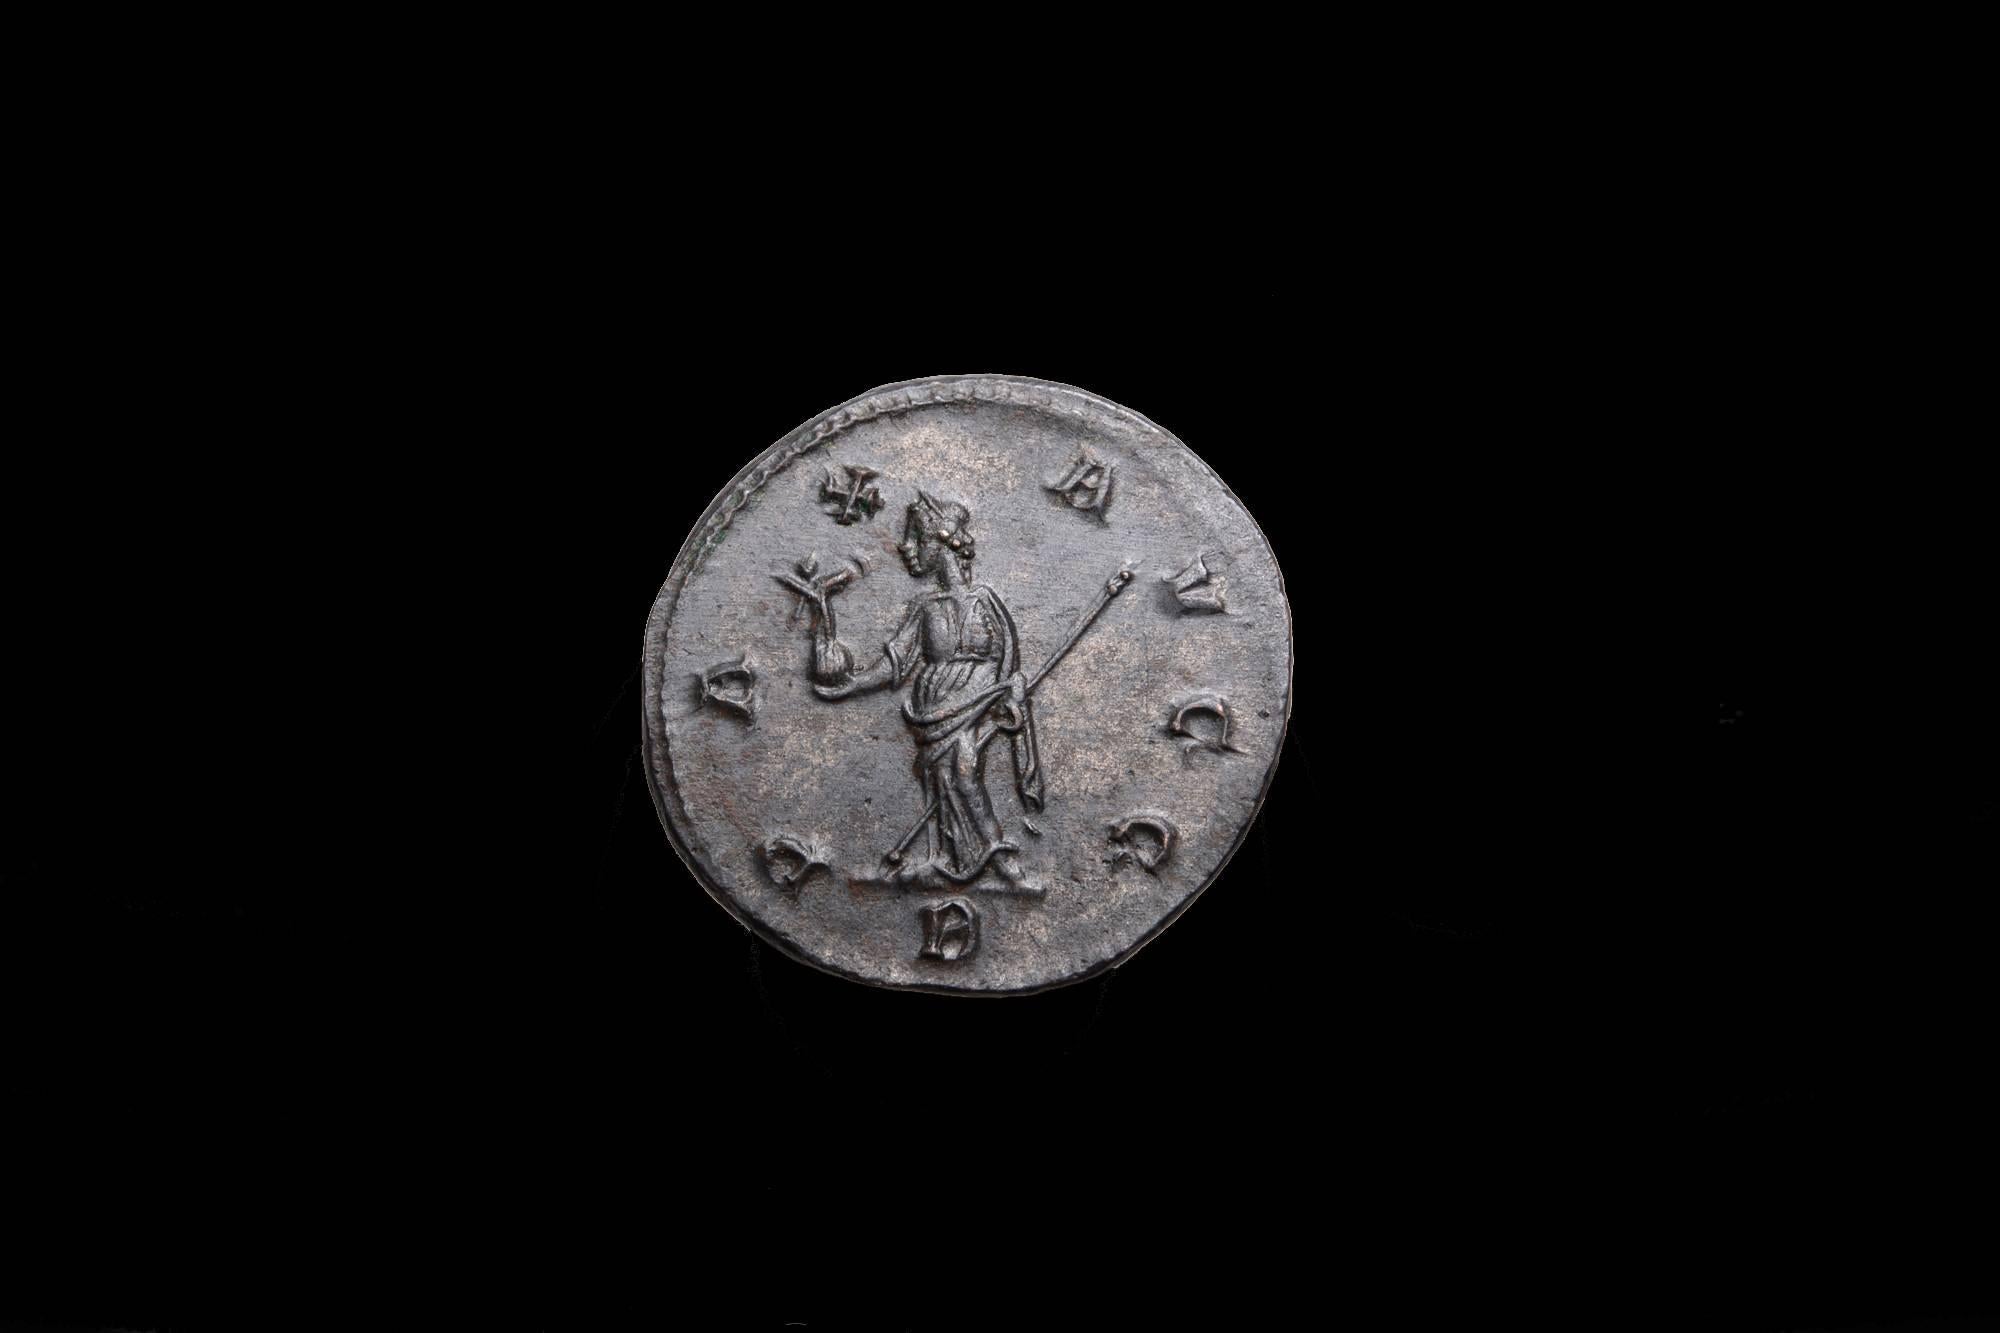 A beautifully preserved, well struck, and perfectly centred ancient Roman antoninianus minted under Emperor Maximianus (Marcus Aurelius Valerius Maximianus Herculius Augustus). Struck circa 285 AD.
 
The obverse with a superb, detailed portrait of